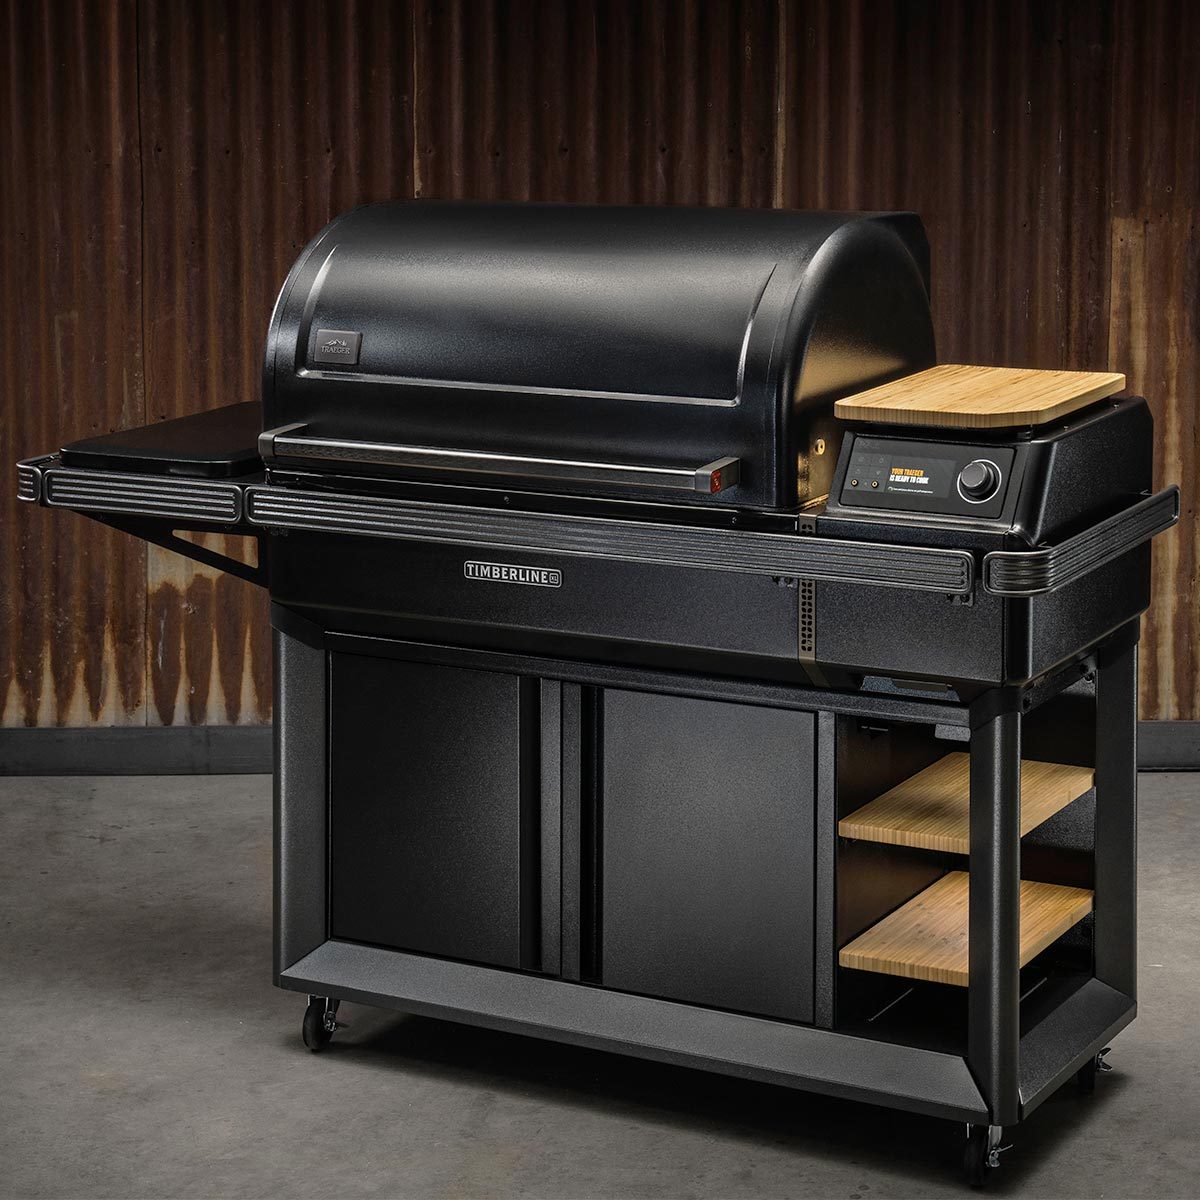 A Grill with Wi-Fi: Traeger Timberline XL Grill